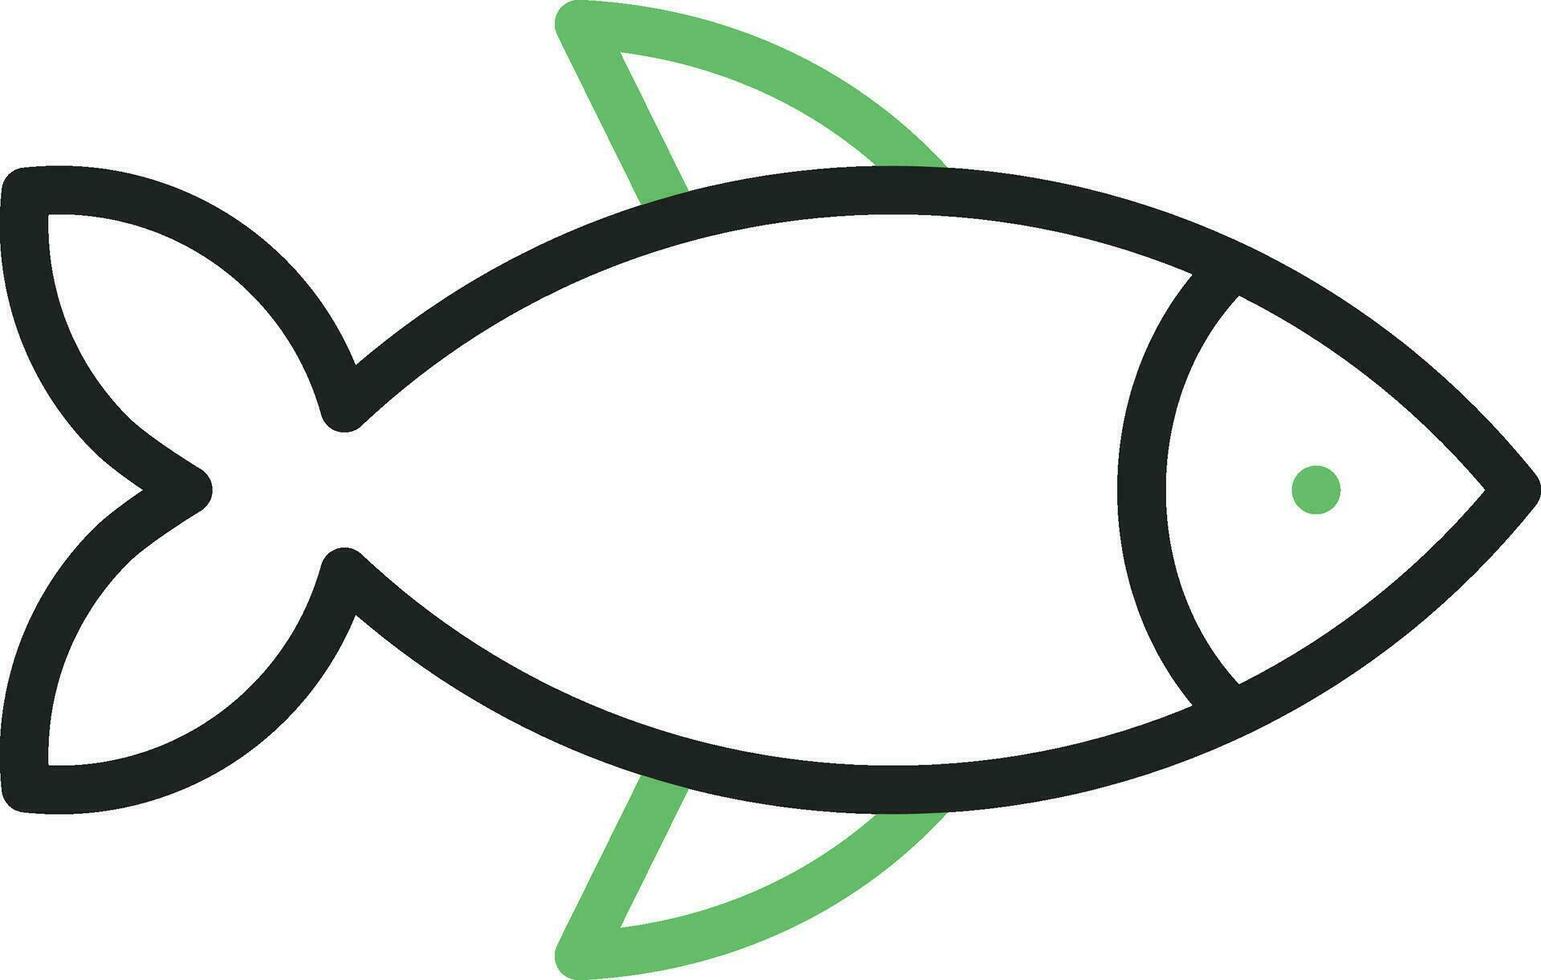 Fish icon vector image. Suitable for mobile apps, web apps and print media.